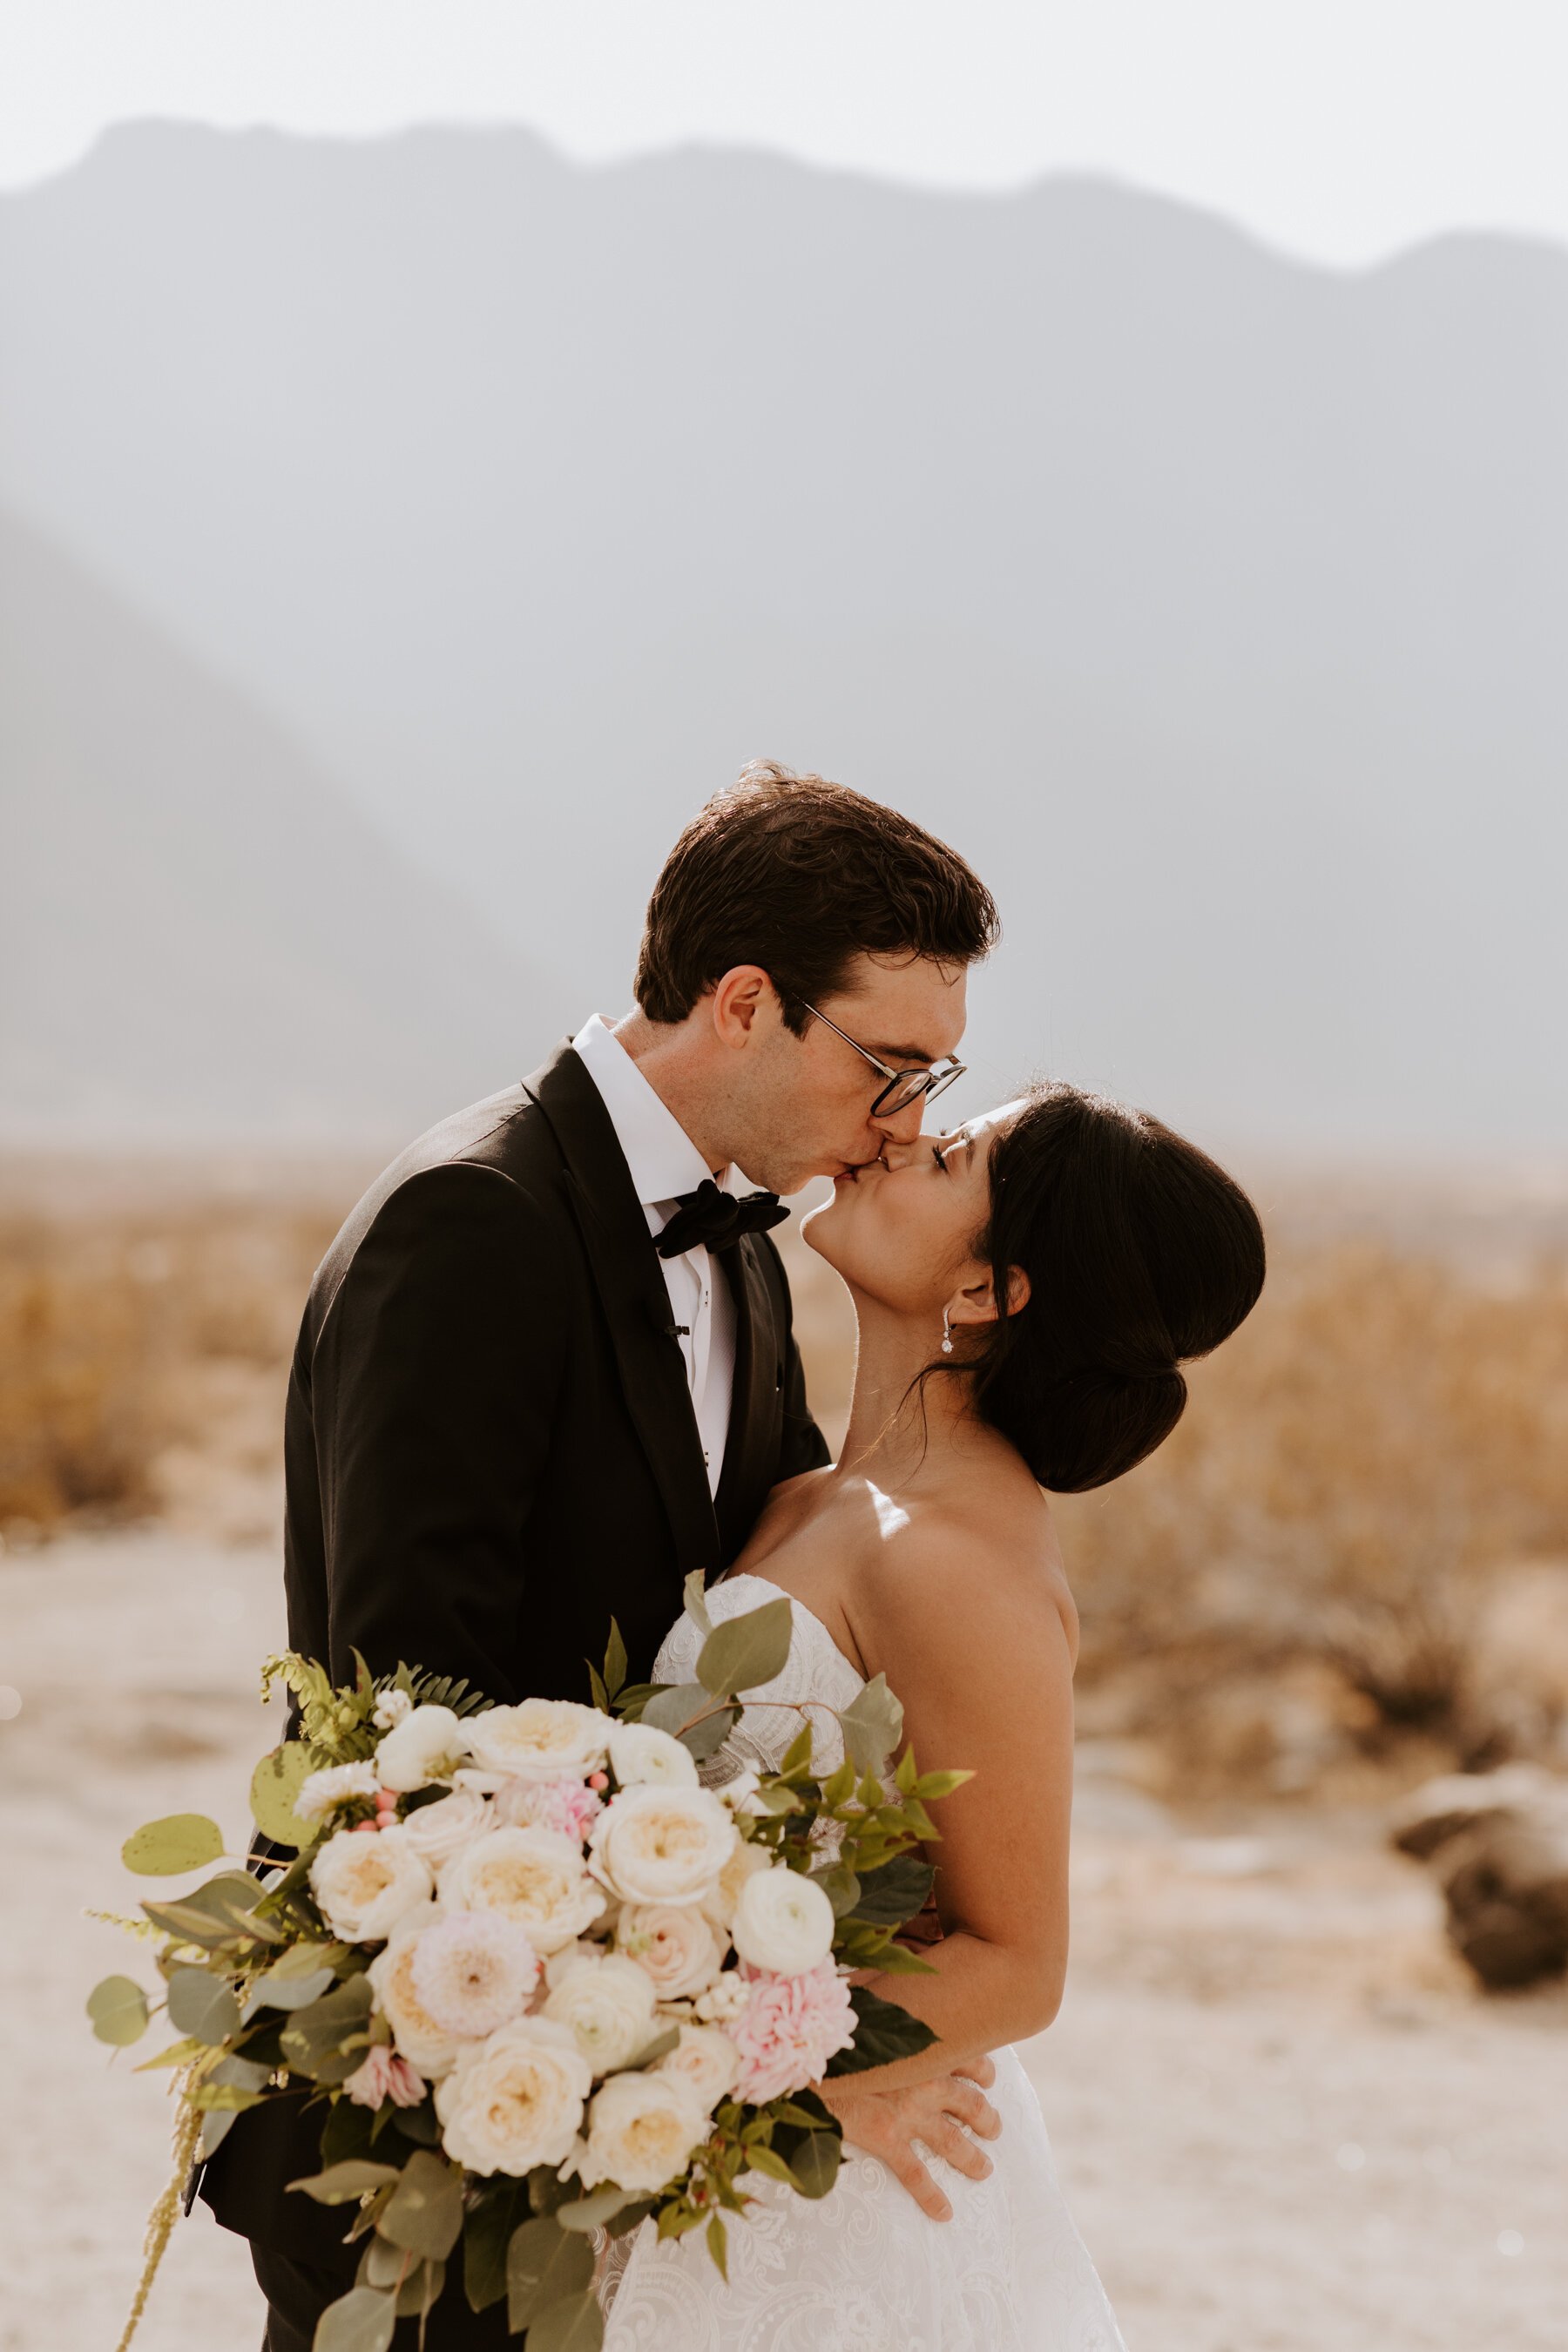 Bride and Groom close up portrait in Palm Springs, Palm Springs Wedding and Elopement Photographer, Photo by Tida Svy